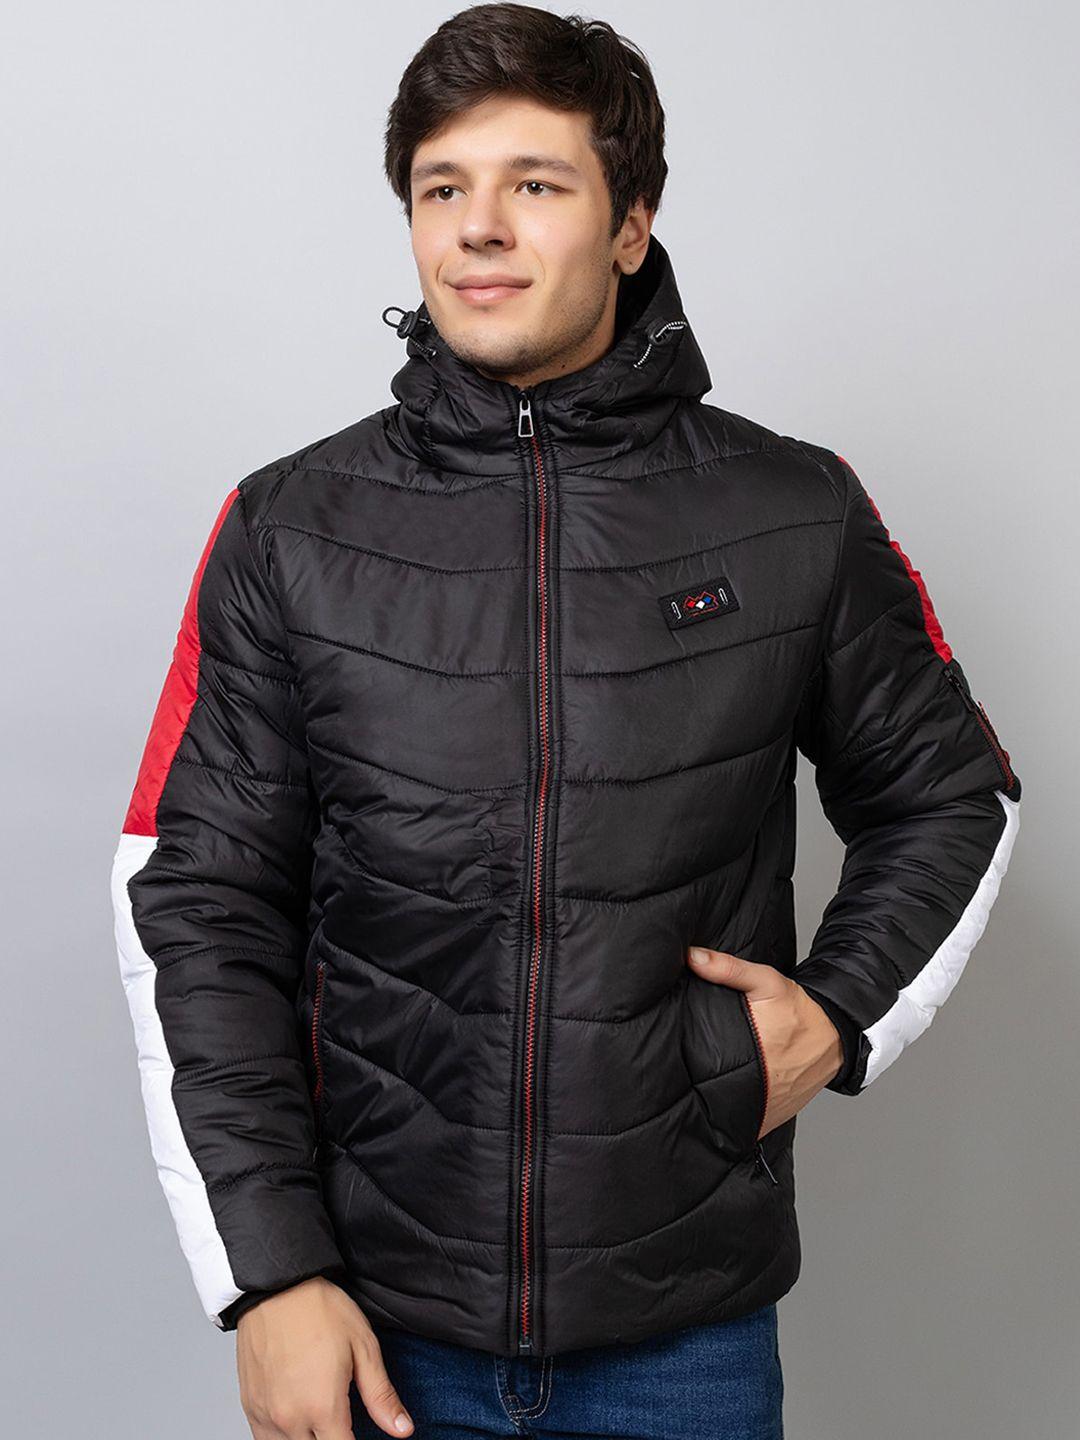 xohy hooded lightweight padded jacket